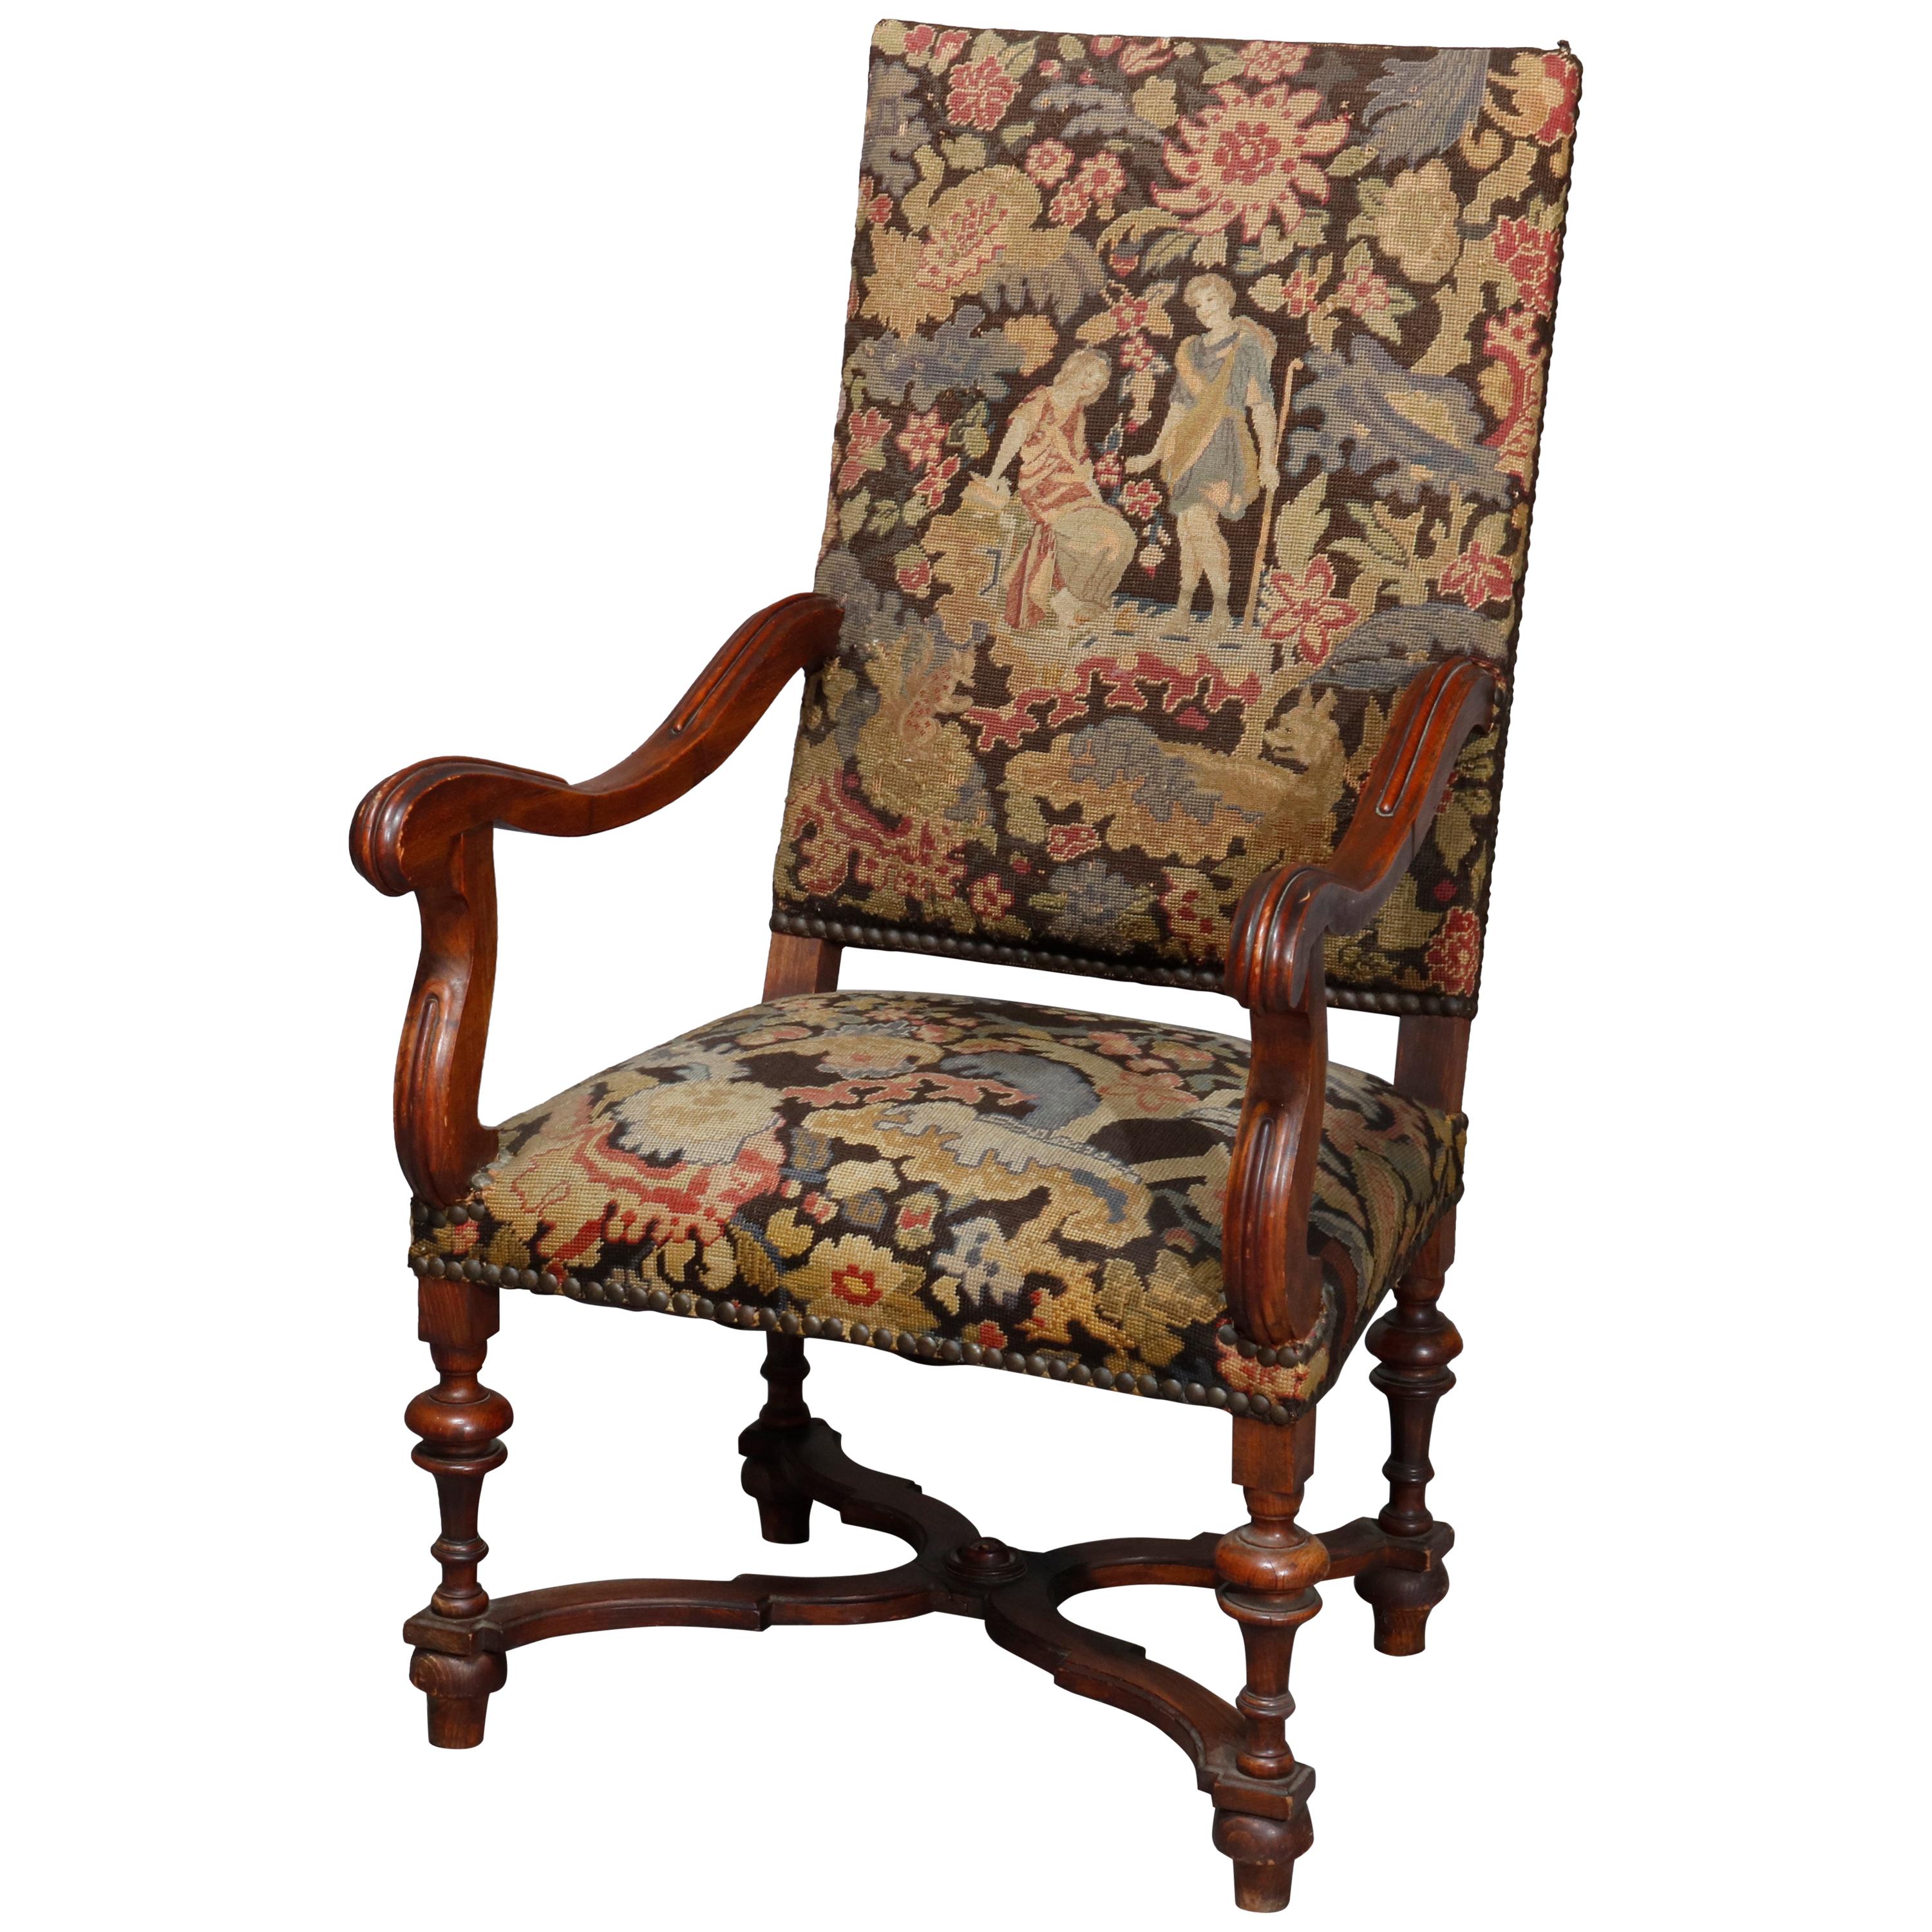 Antique English Elizabethan Style Walnut and Tapestry Tall Throne Chair